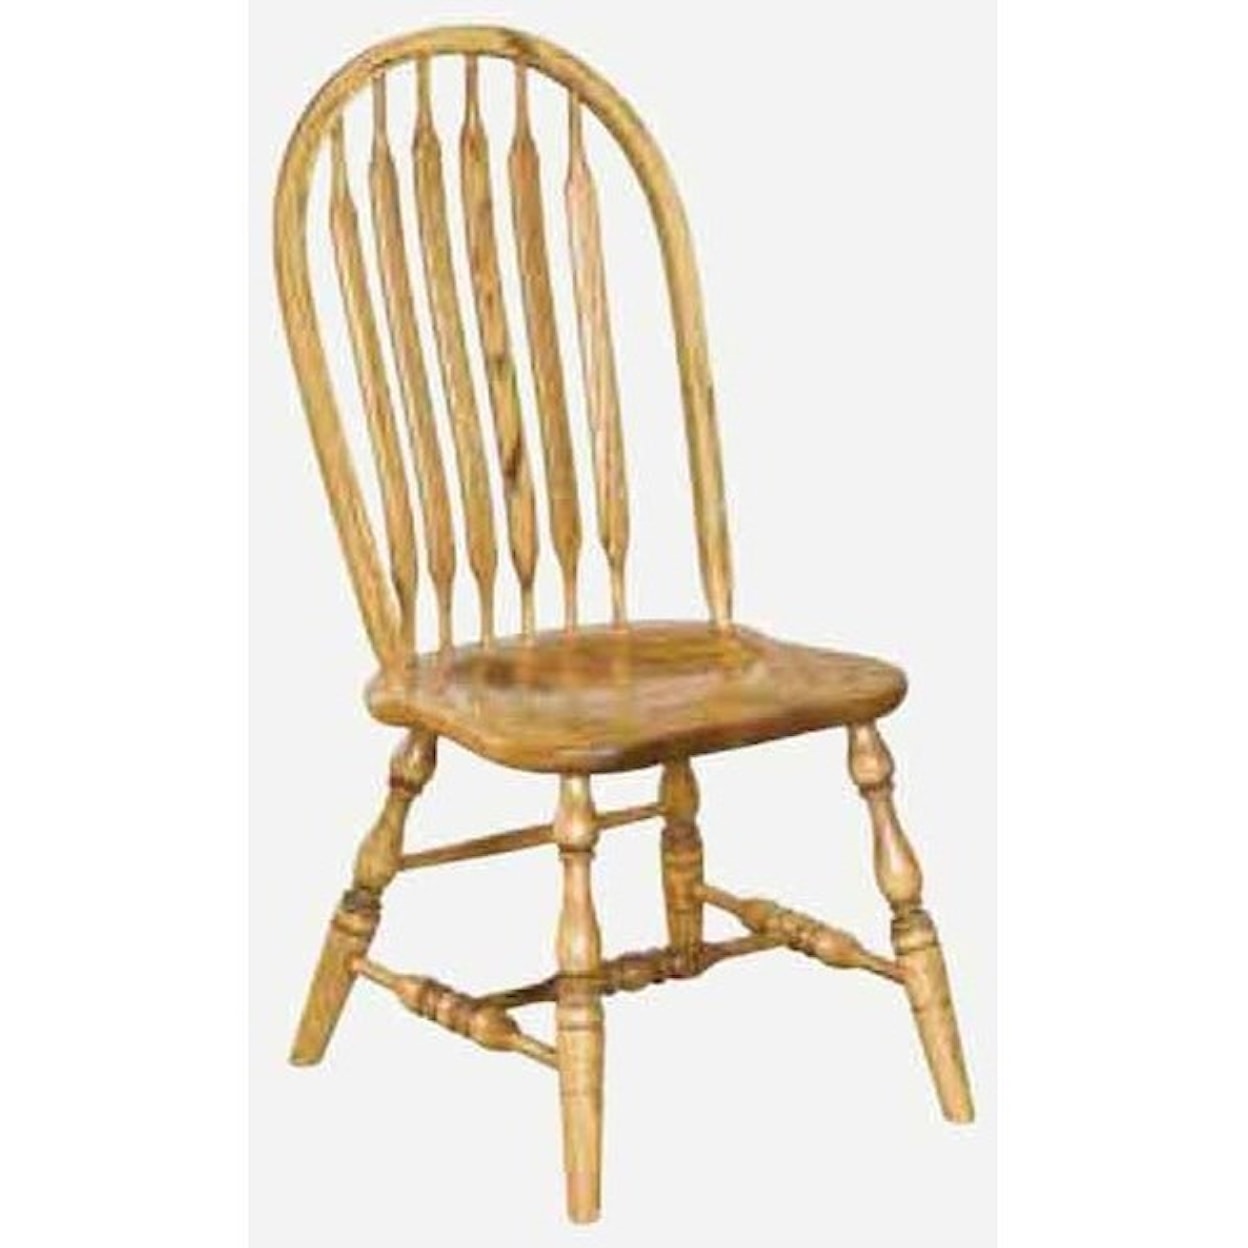 Amish Impressions by Fusion Designs Angola Customizable Solid Wood Side Chair